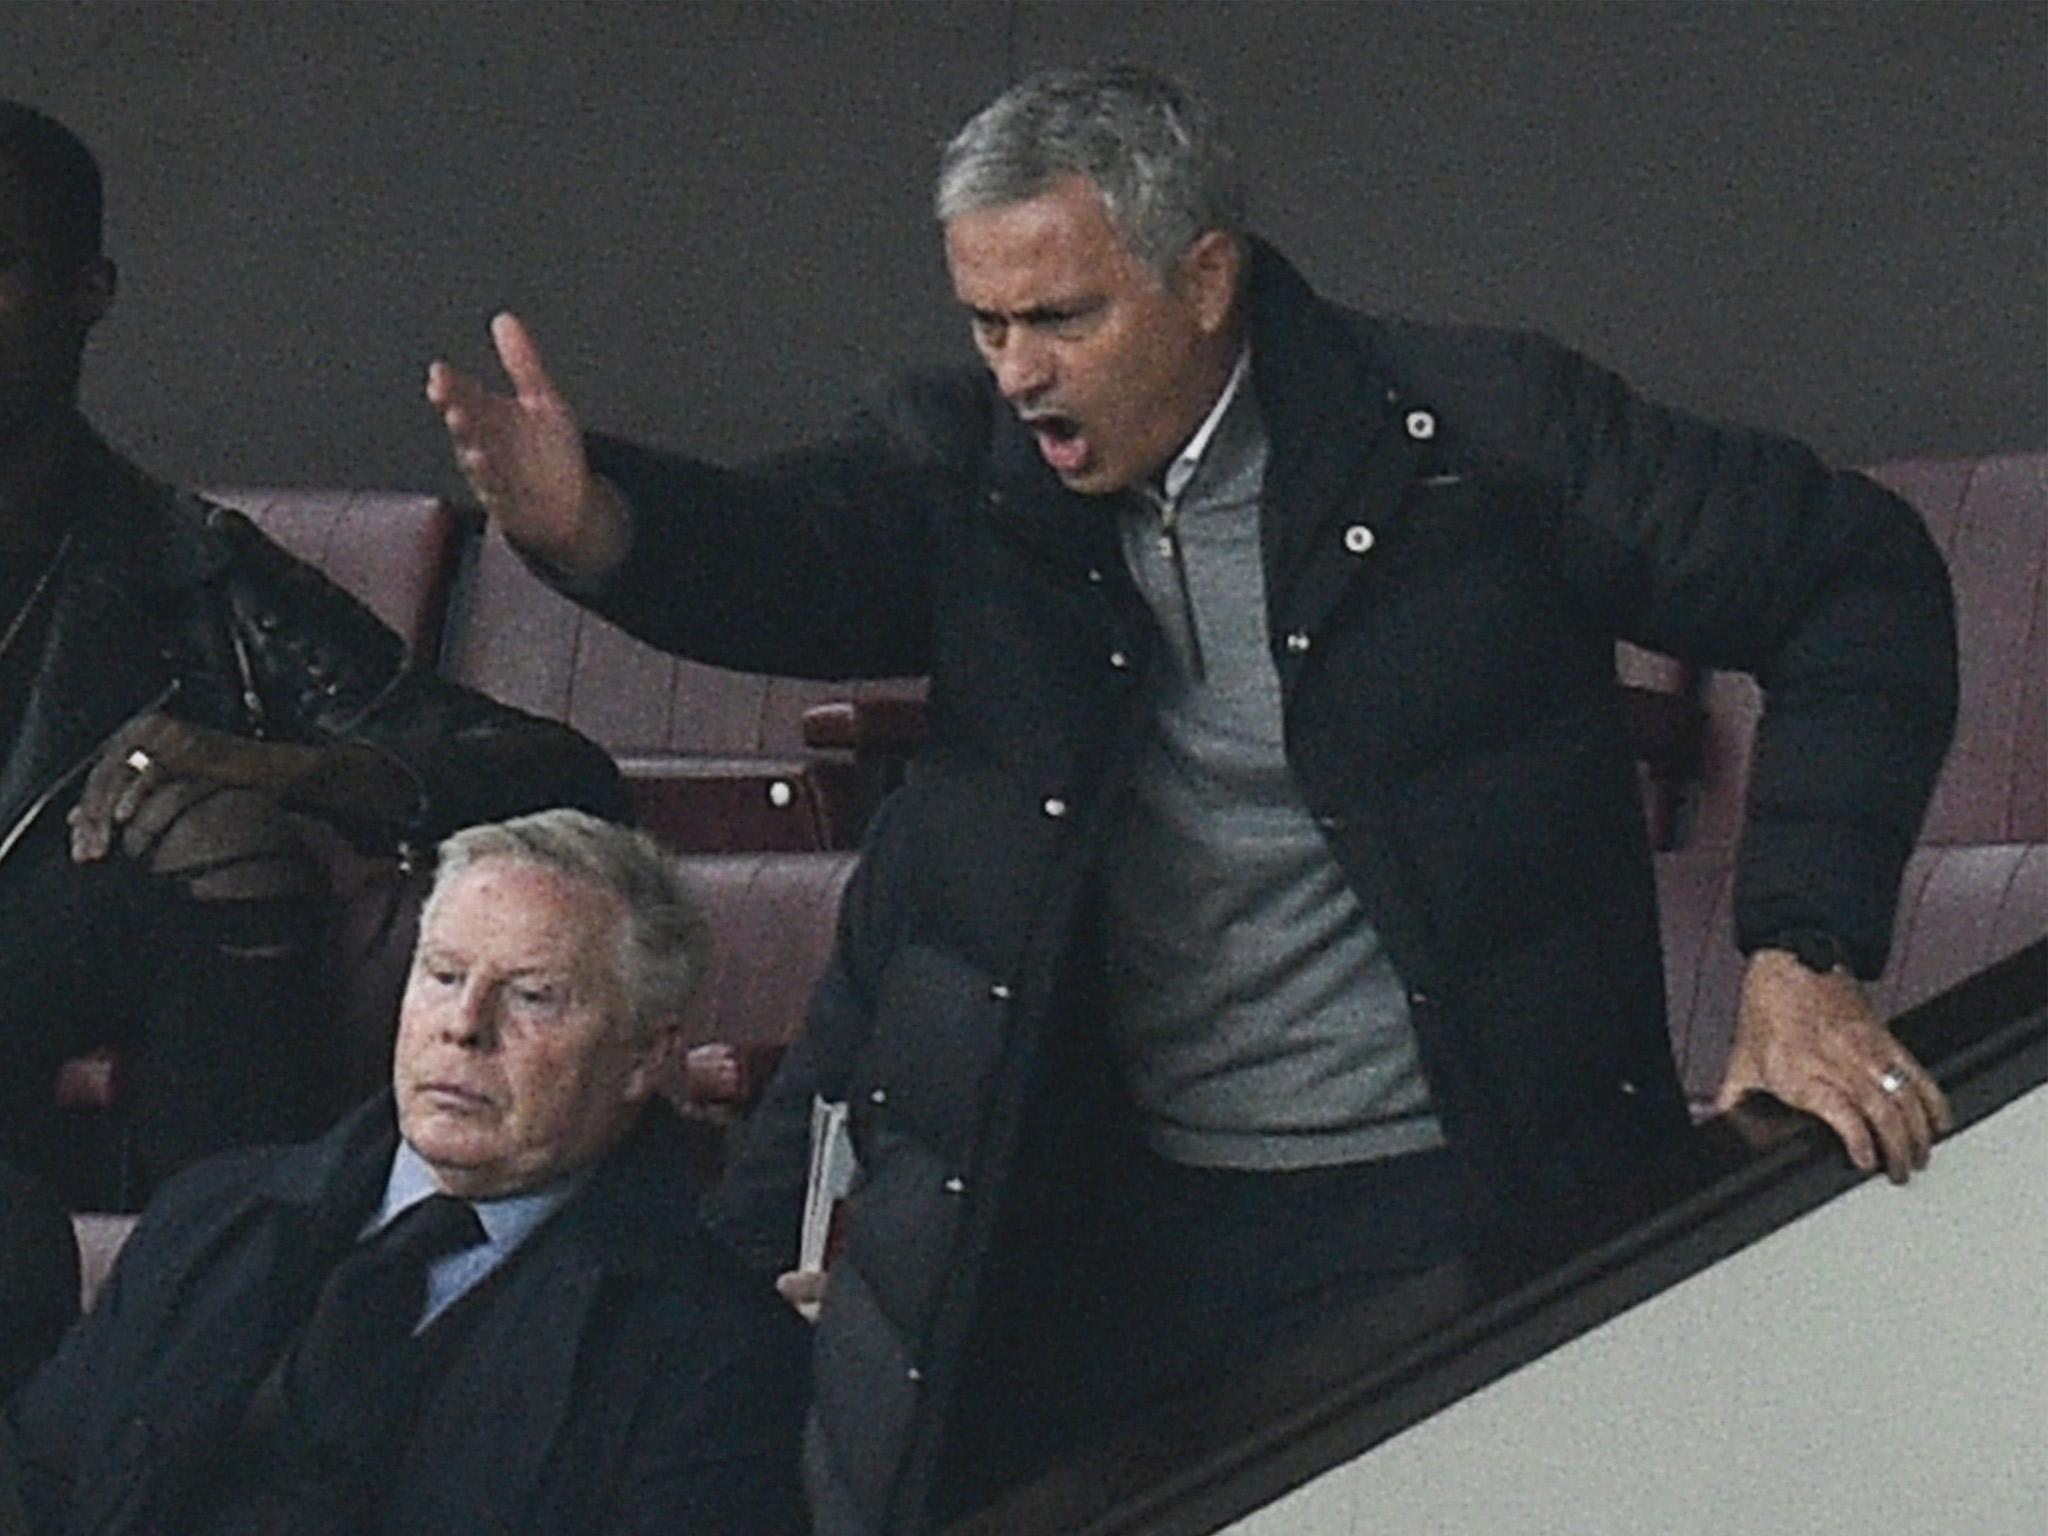 An irate Jose Mourinho rages after being sent to the stands in Manchester United's 0-0 draw with Burnley